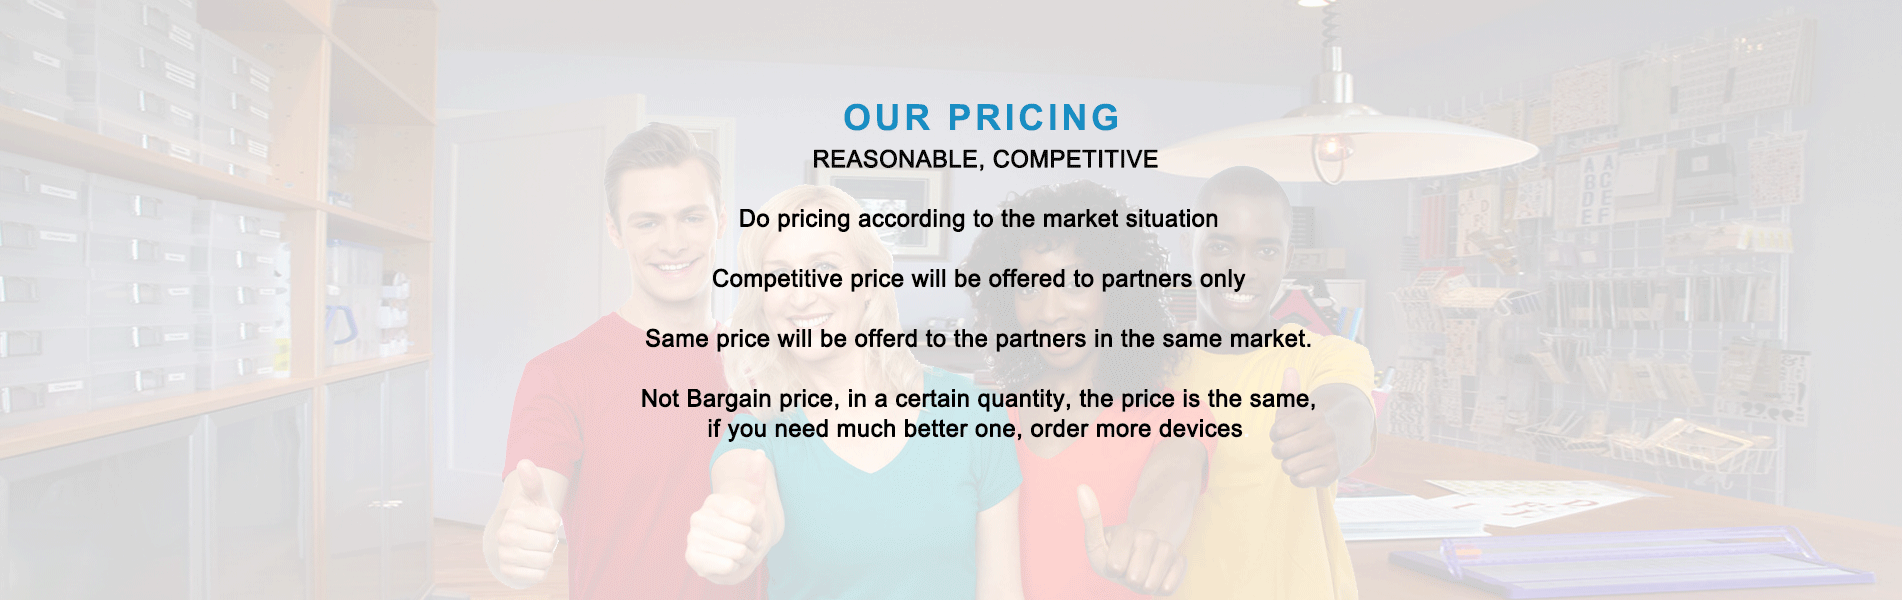 our pricing